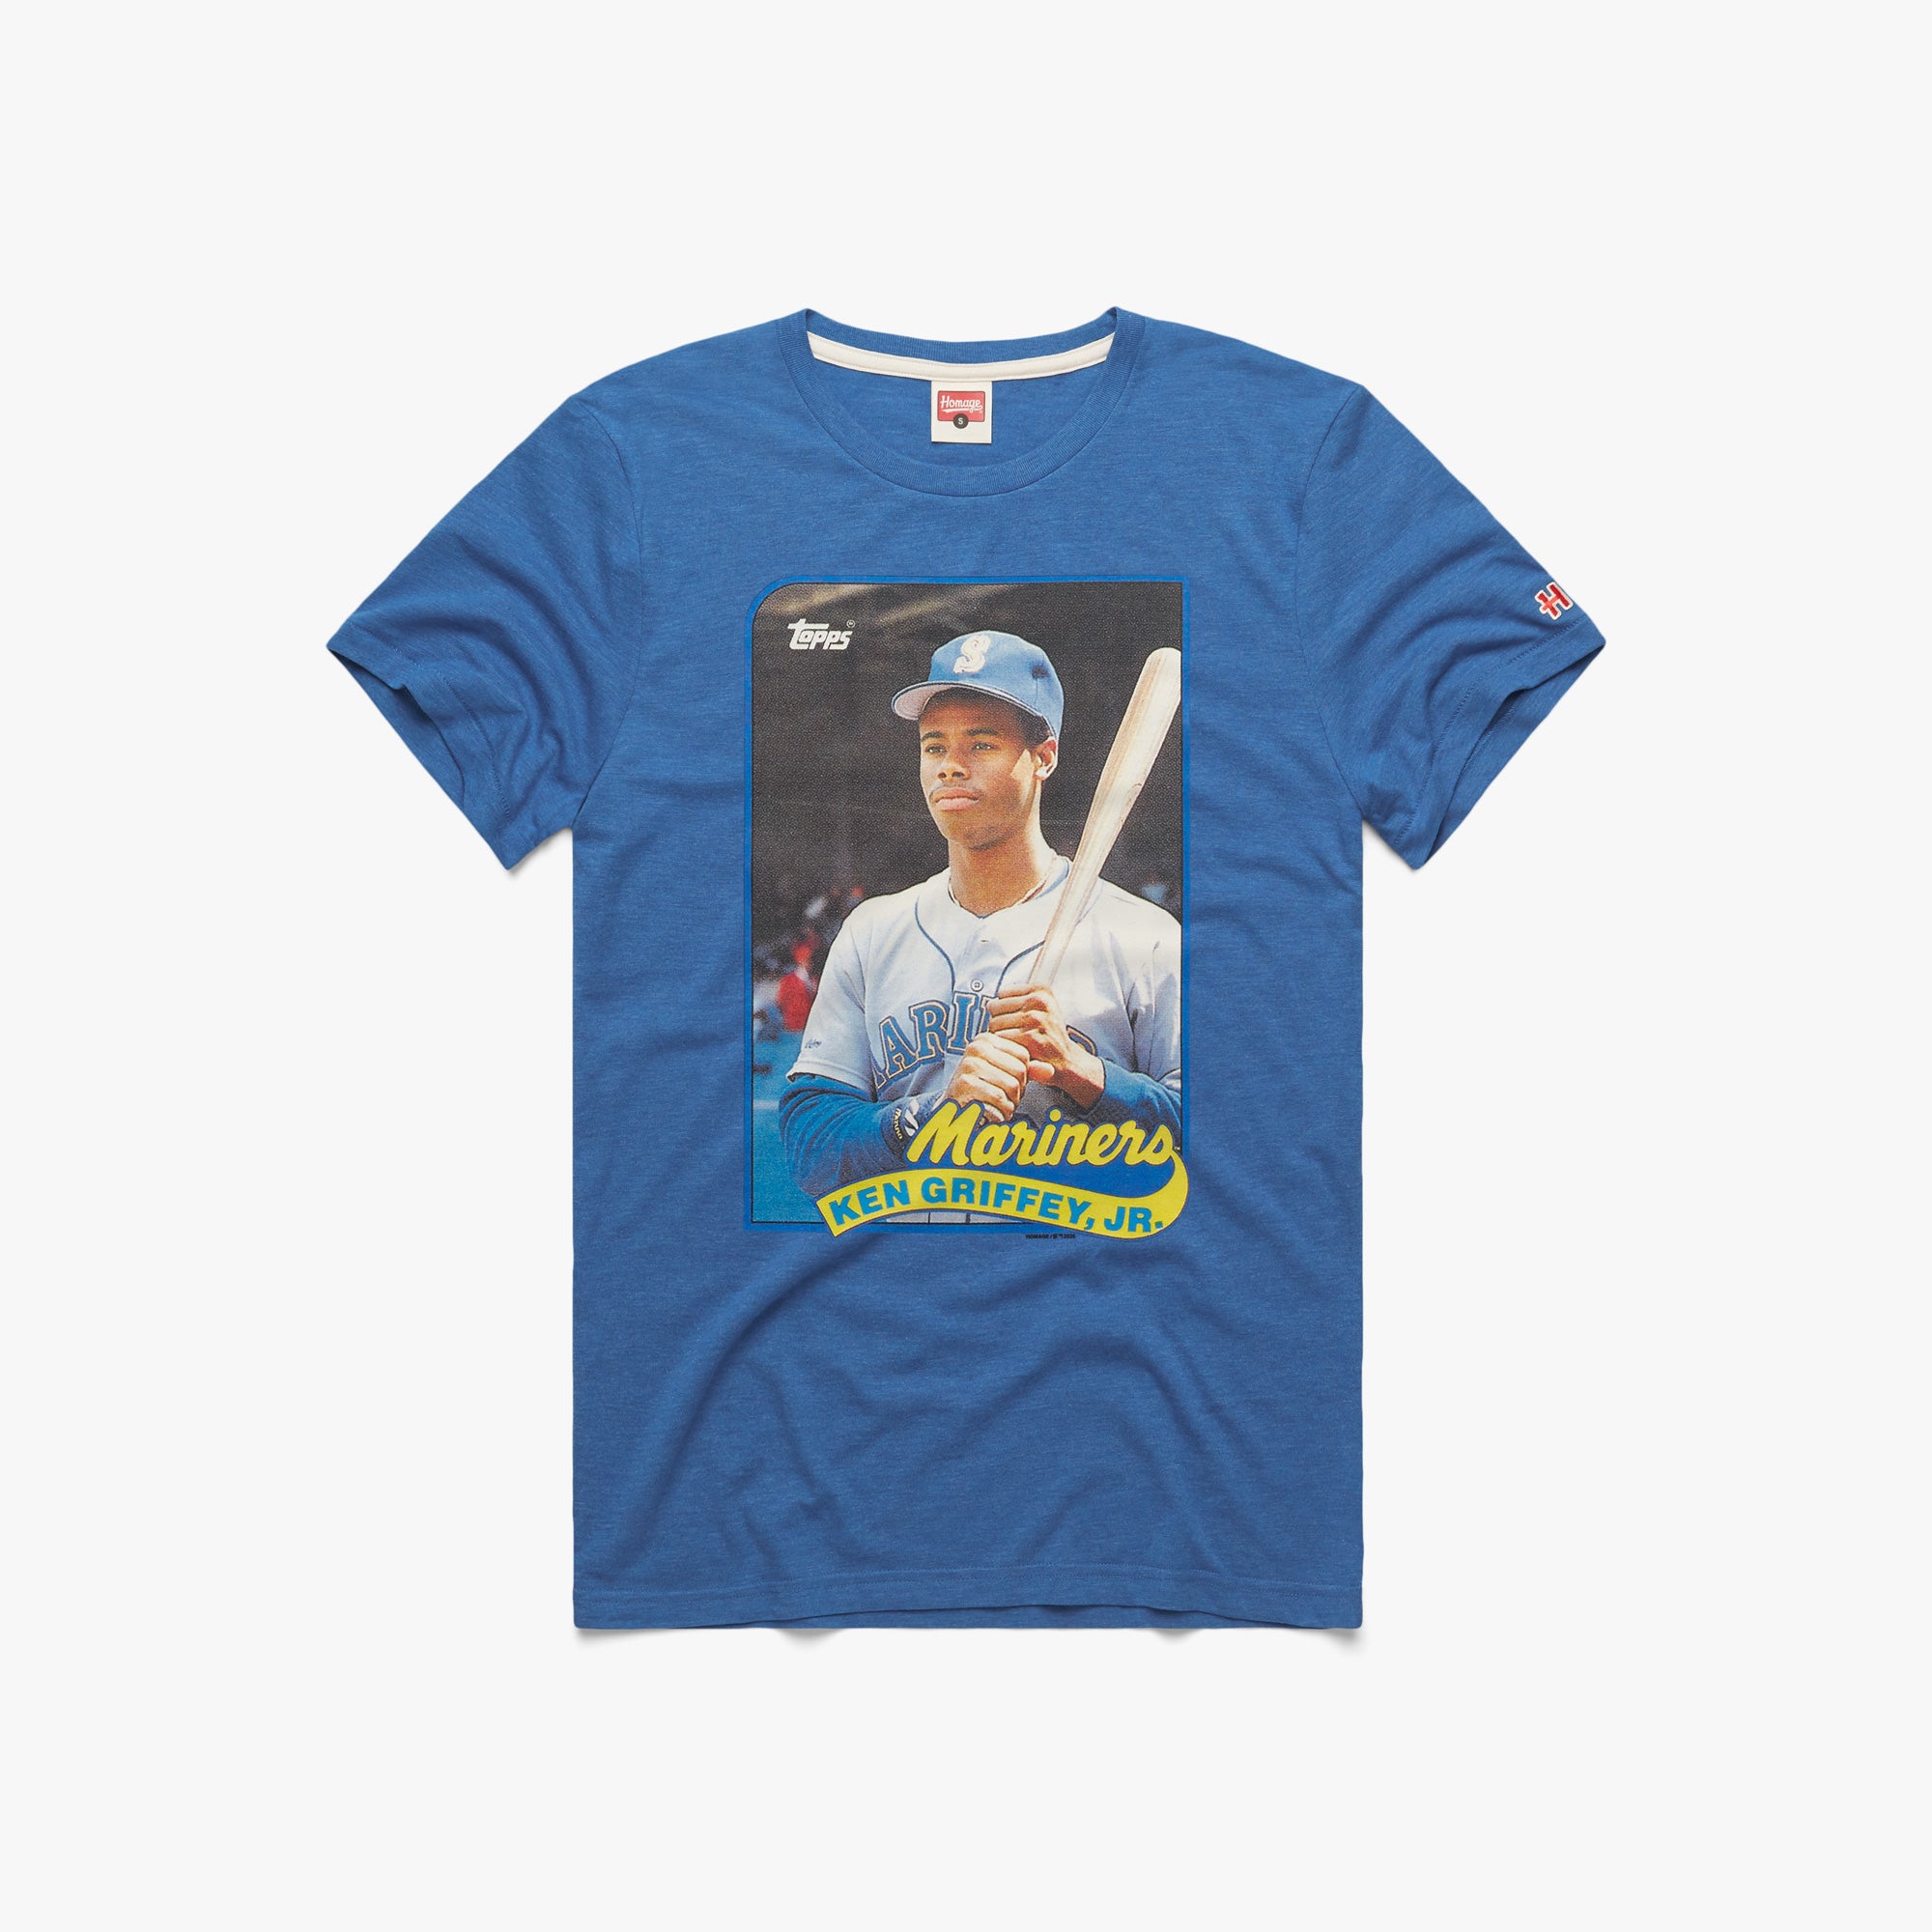 1989 Topps Baseball Ken Griffey Jr. Mariners T-Shirt from Homage. | Royal Blue | Vintage Apparel from Homage.